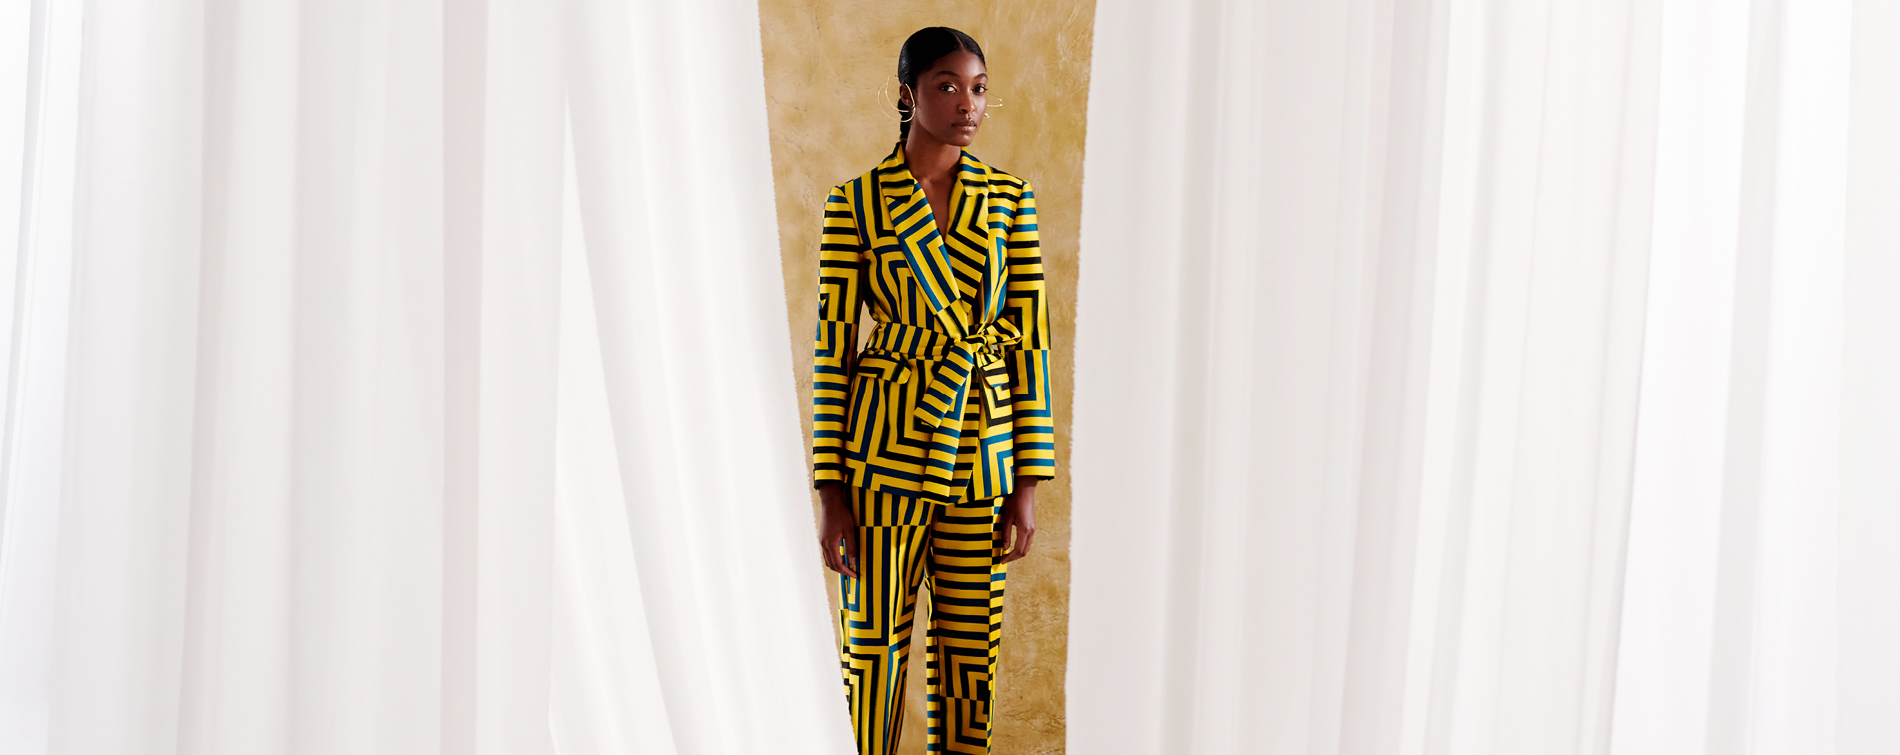 woman in yellow and black striped suit standing between white curtains